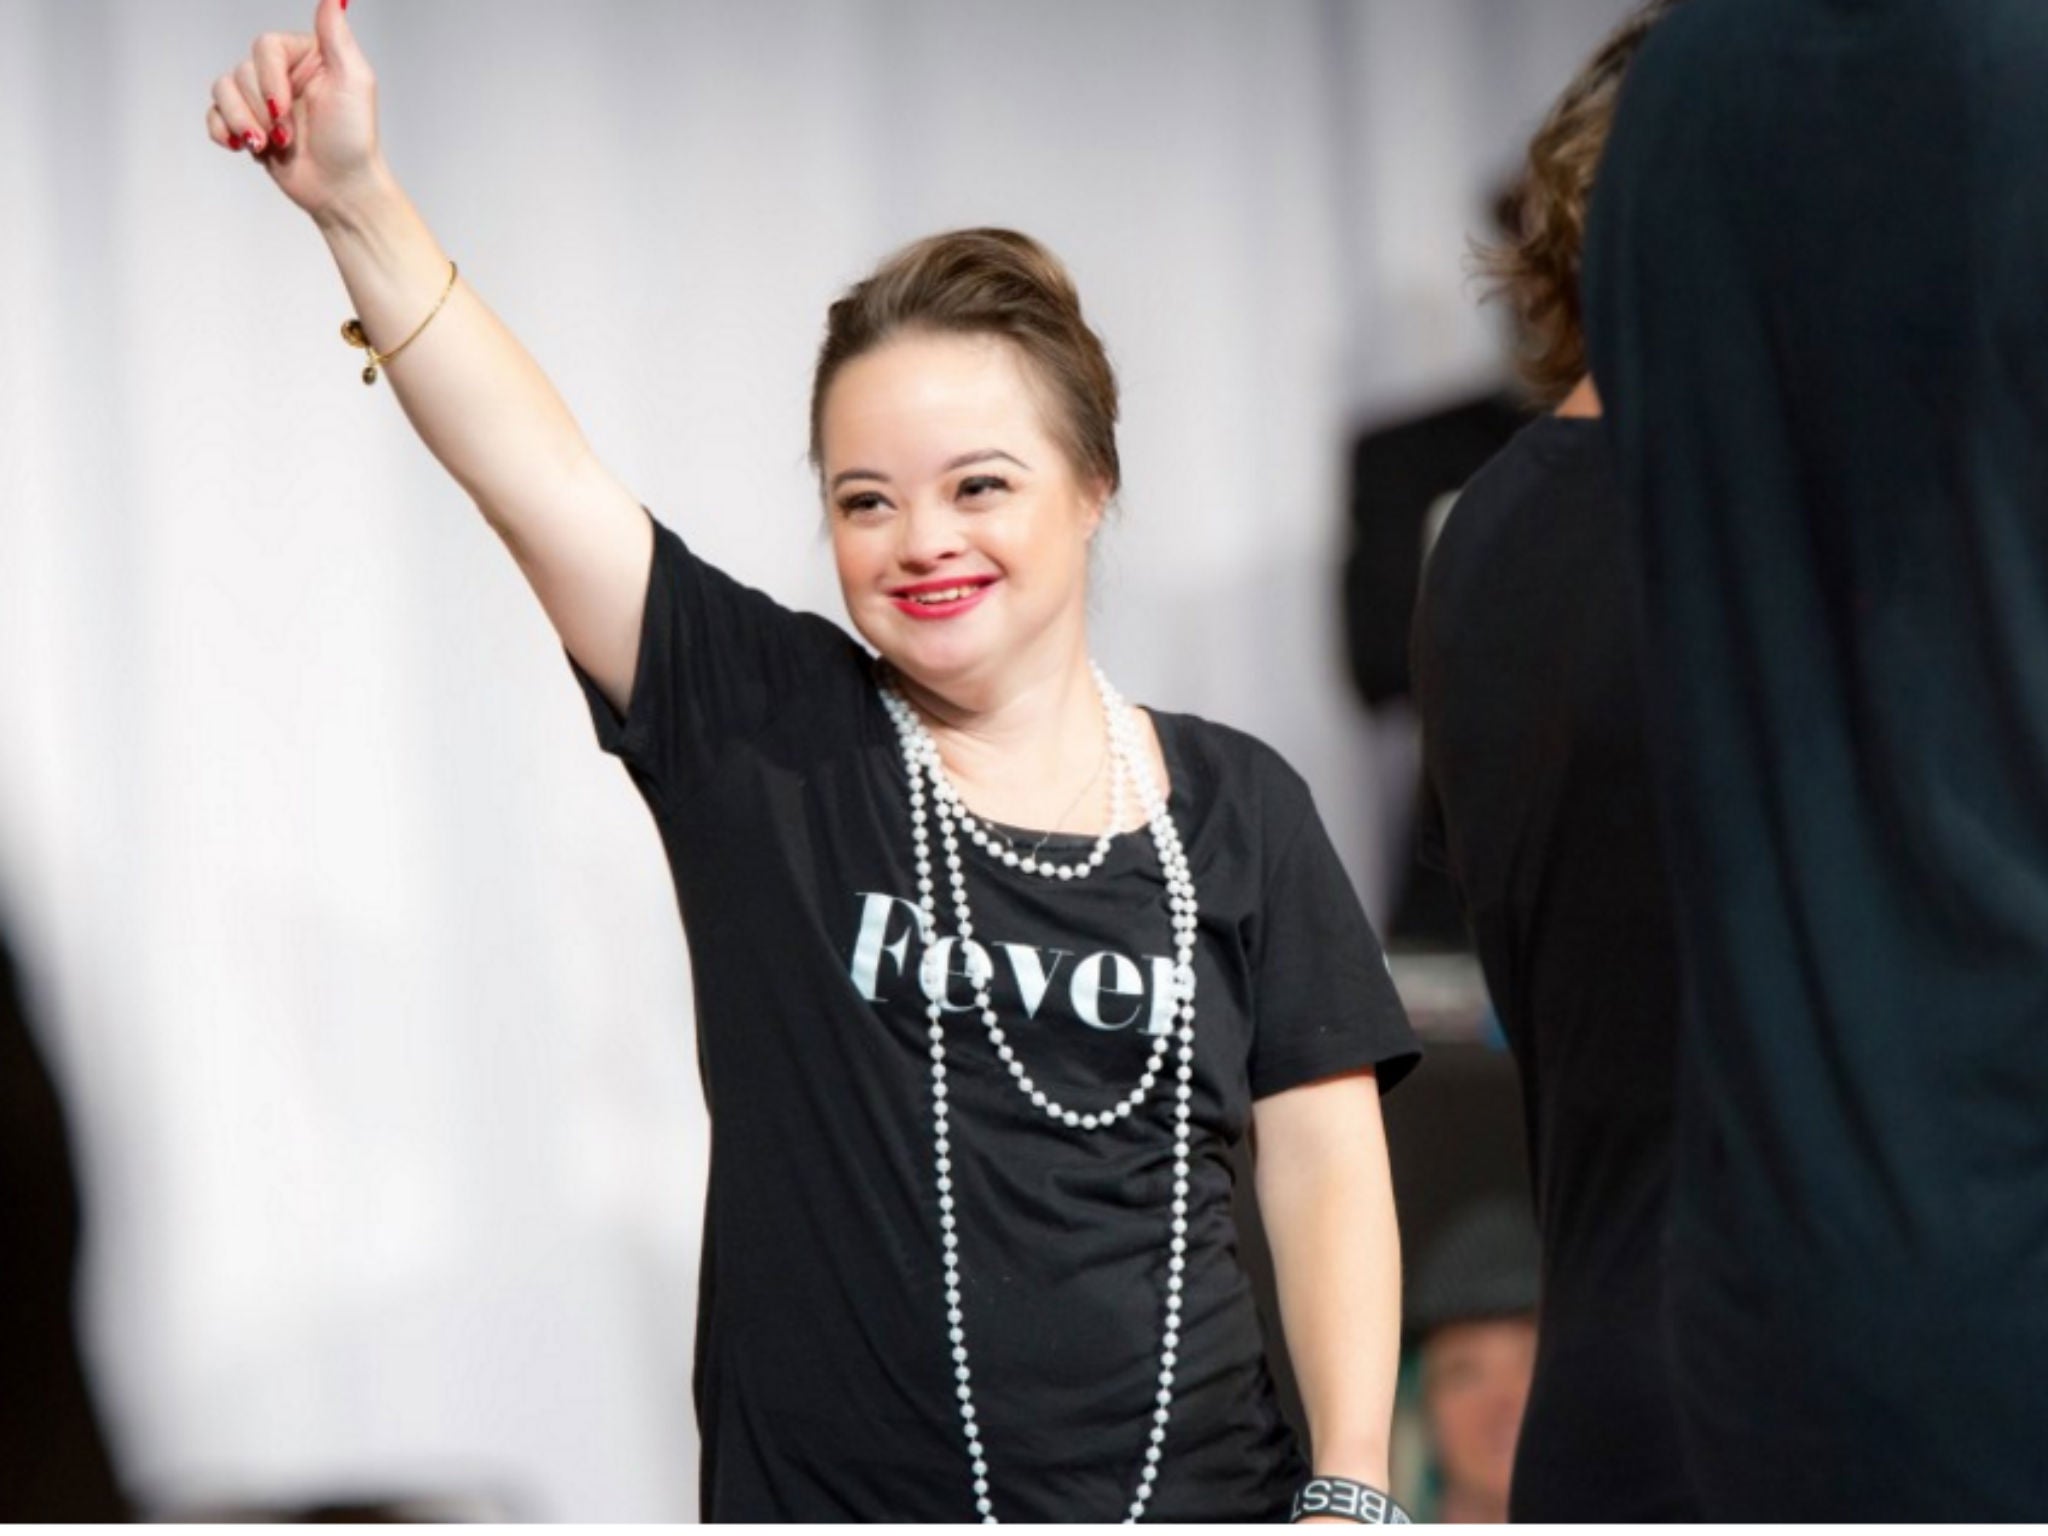 Katie Meade The Model With Downs Syndrome Fronting A Beauty Campaign 